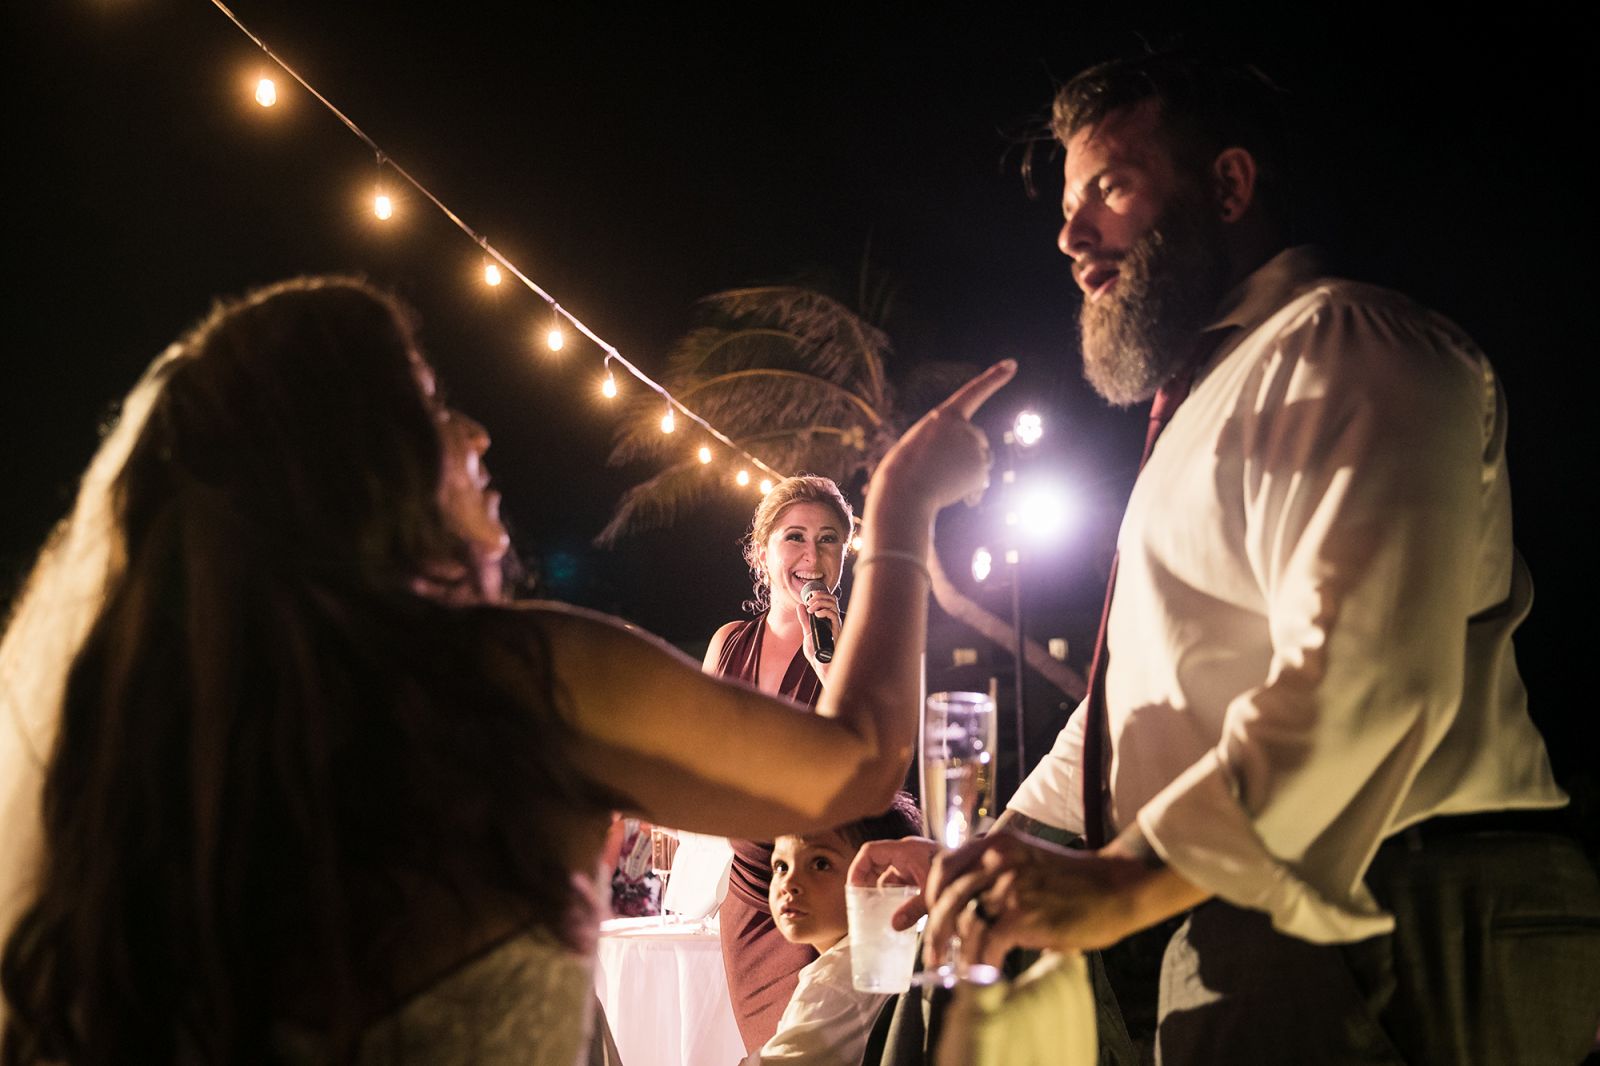 wedding photojournalism composition and lens choice